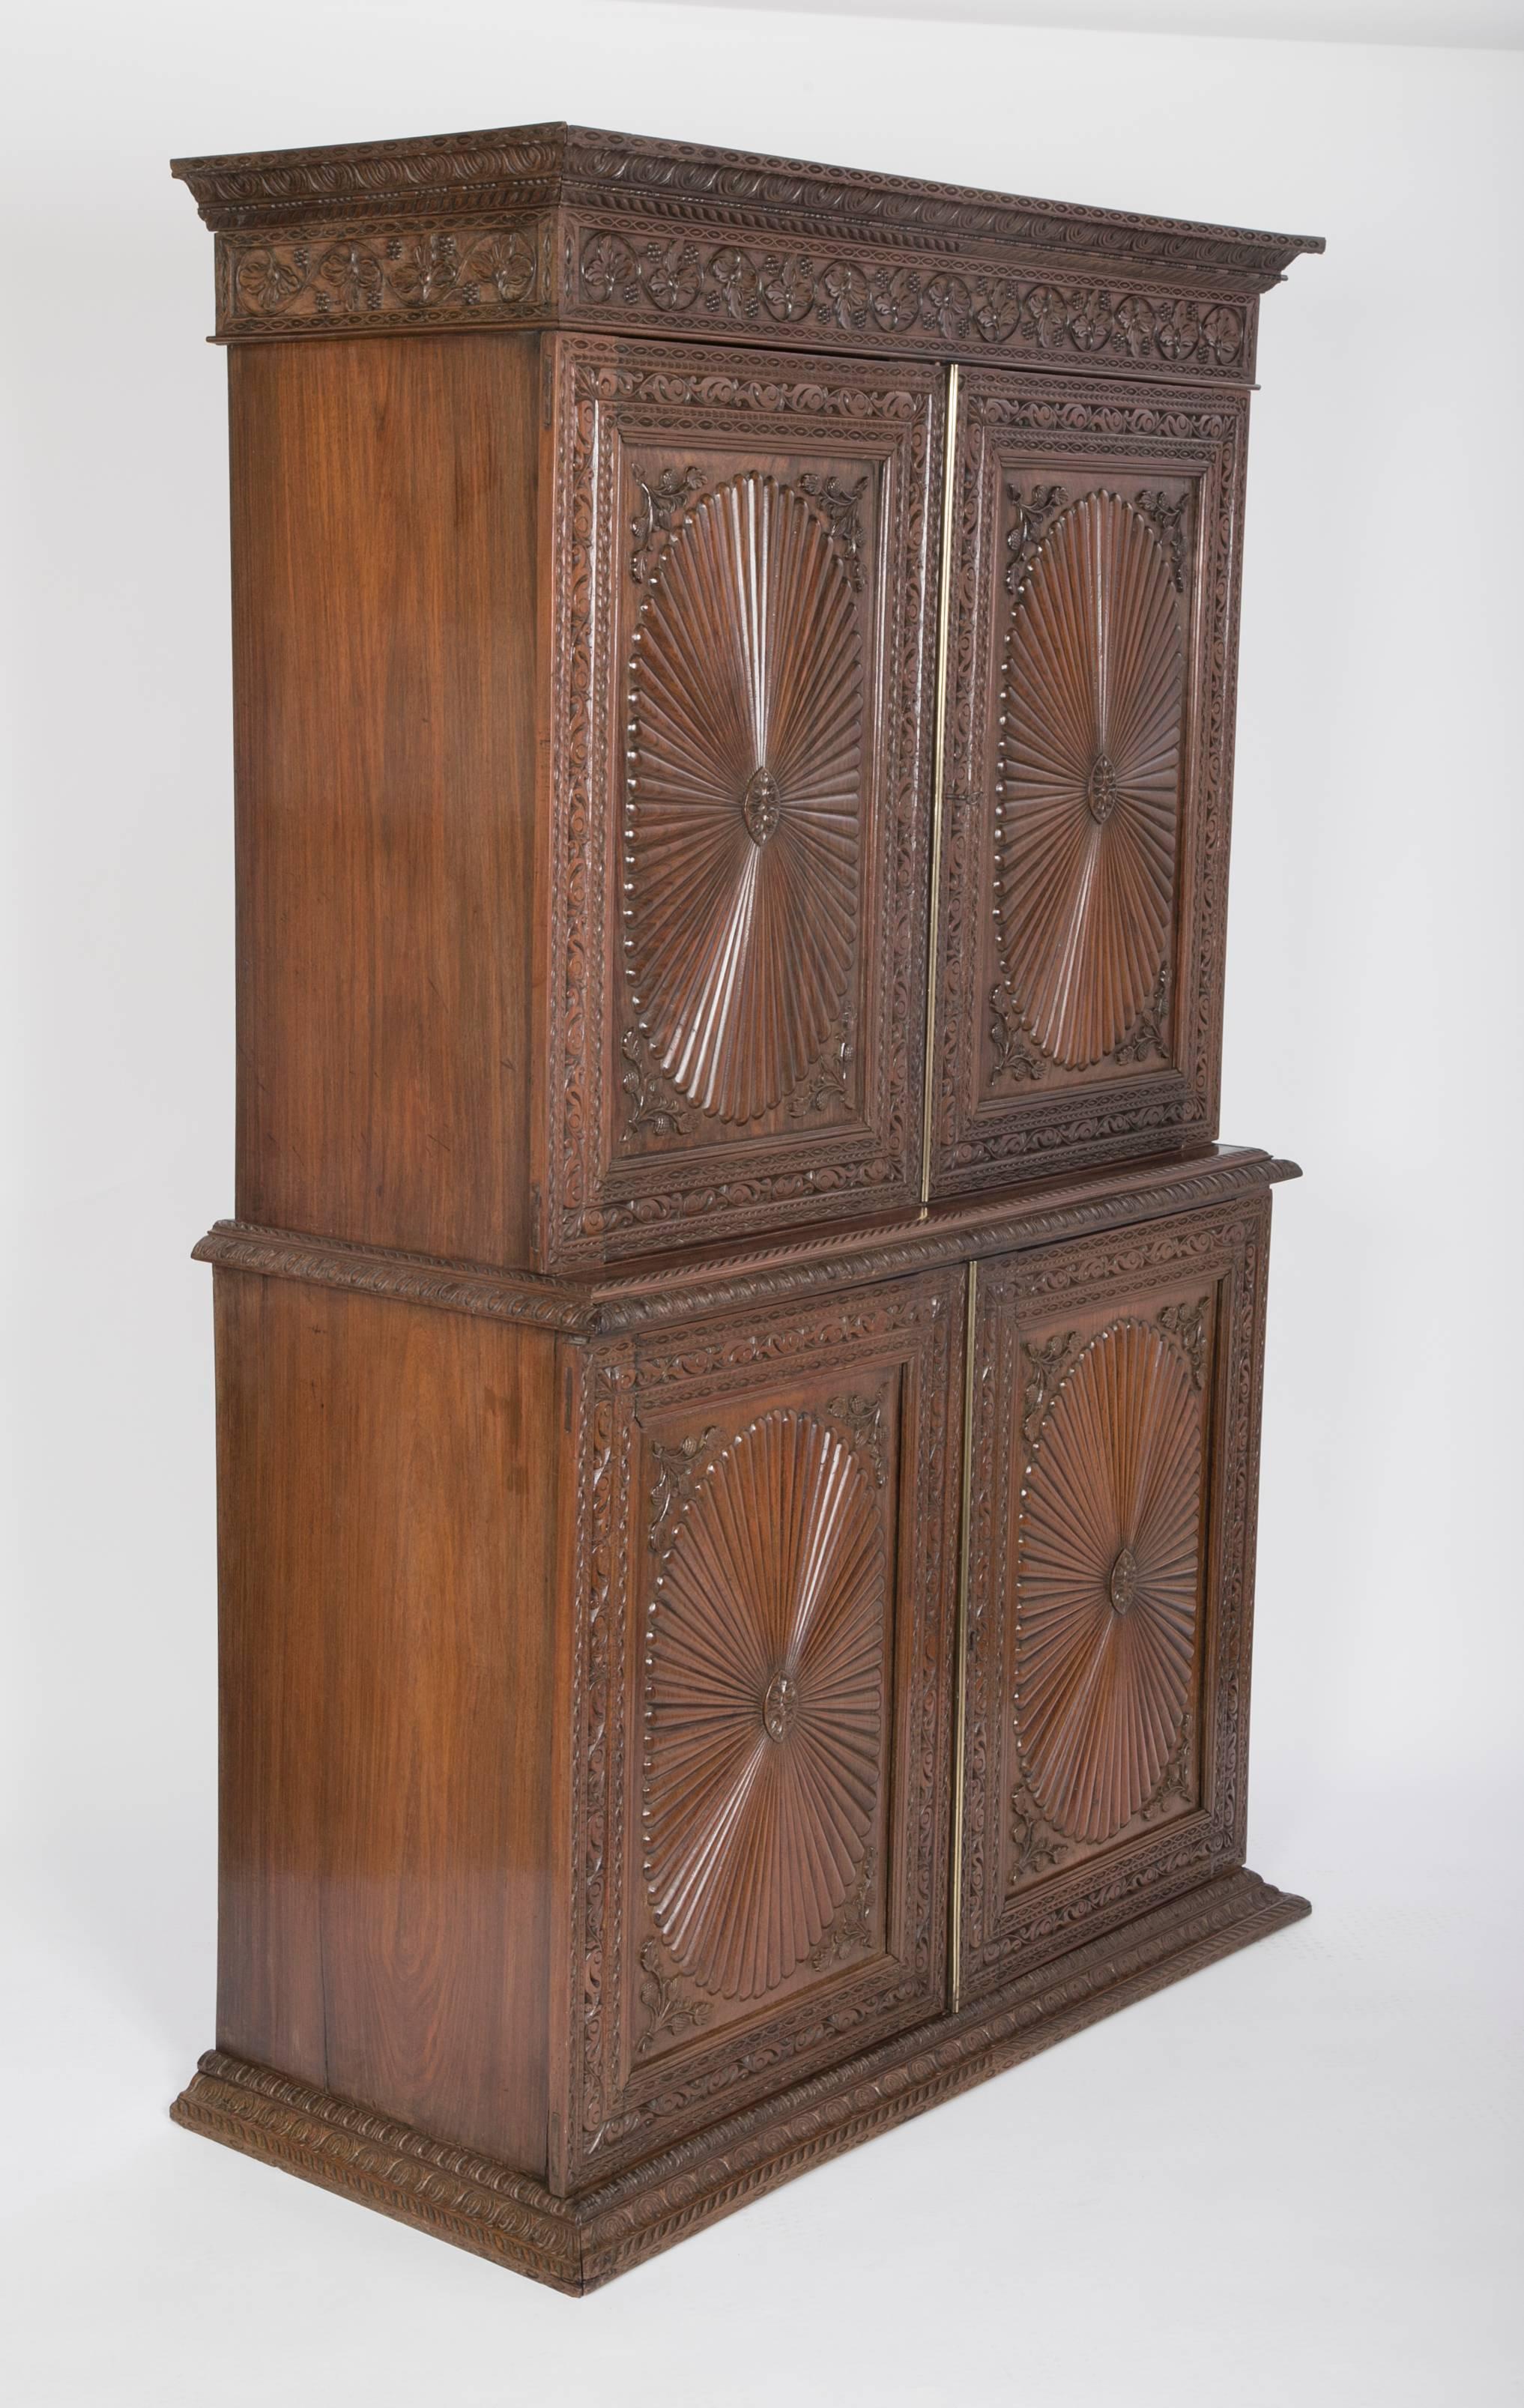 A mid-19th century, Anglo-Indian linen press with four carved stylized sunburst paneled doors and floral carving through out. The upper and lower case each with two shelves.